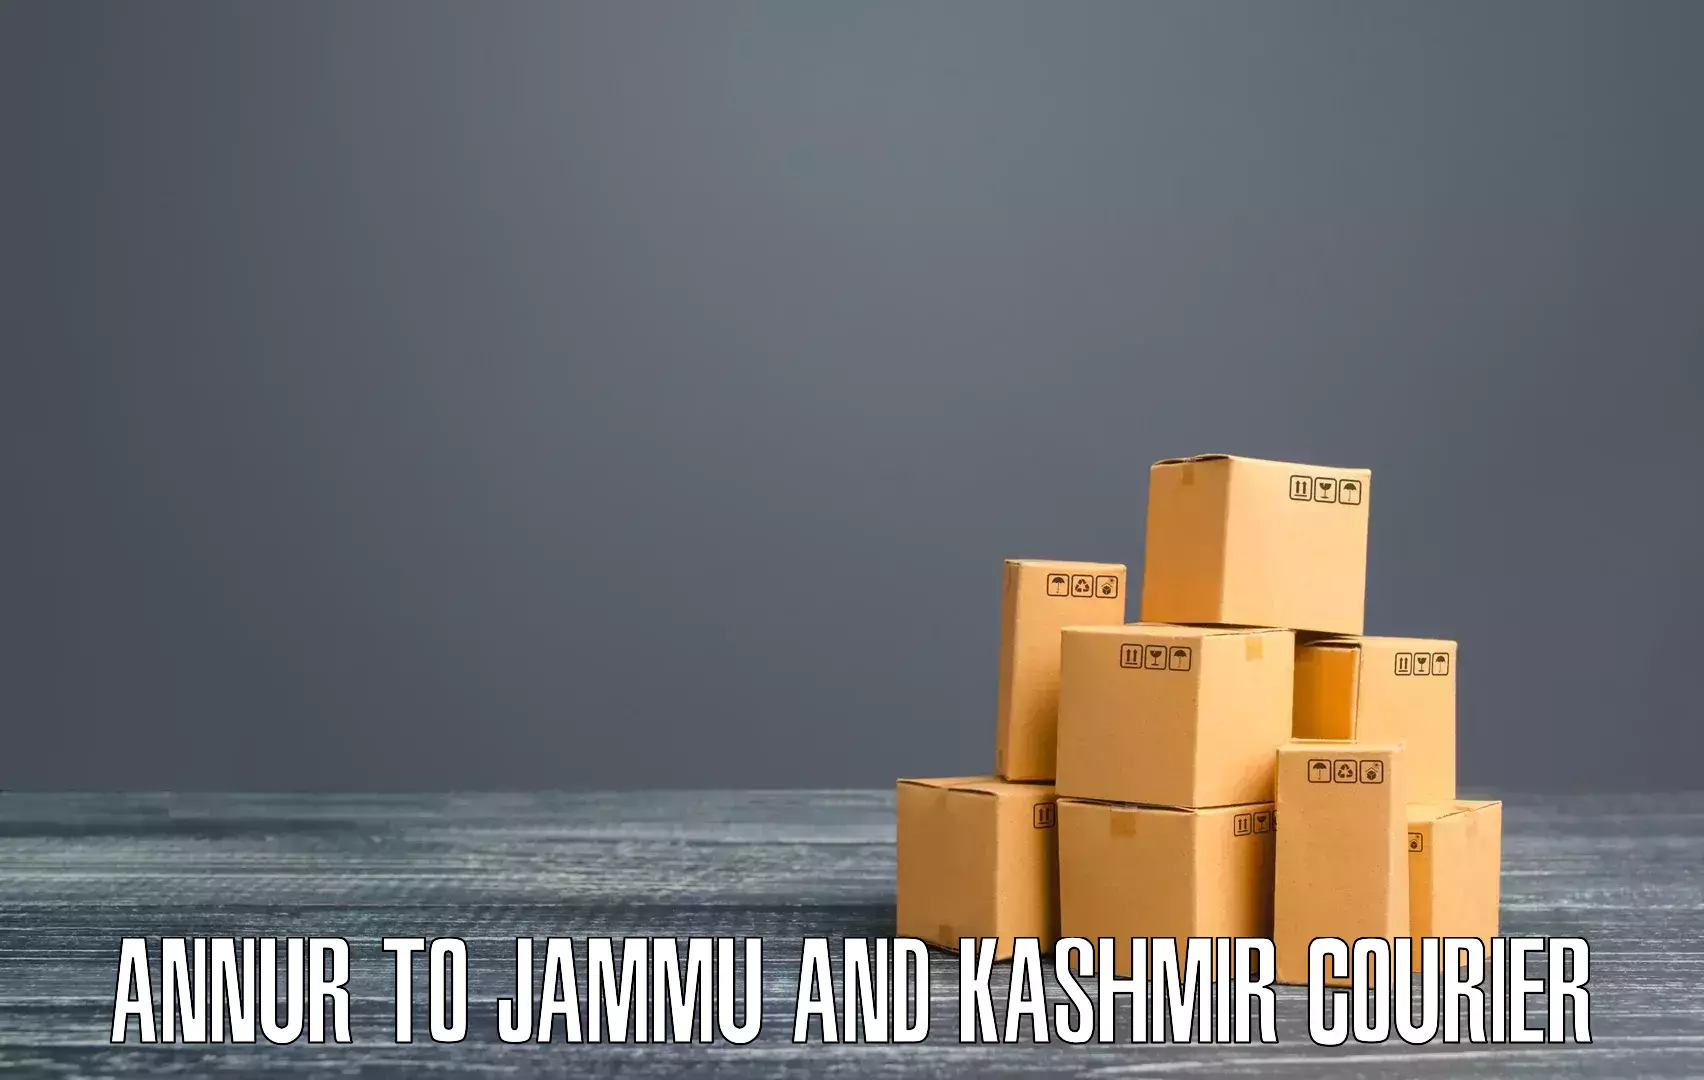 Tech-enabled shipping Annur to Baramulla